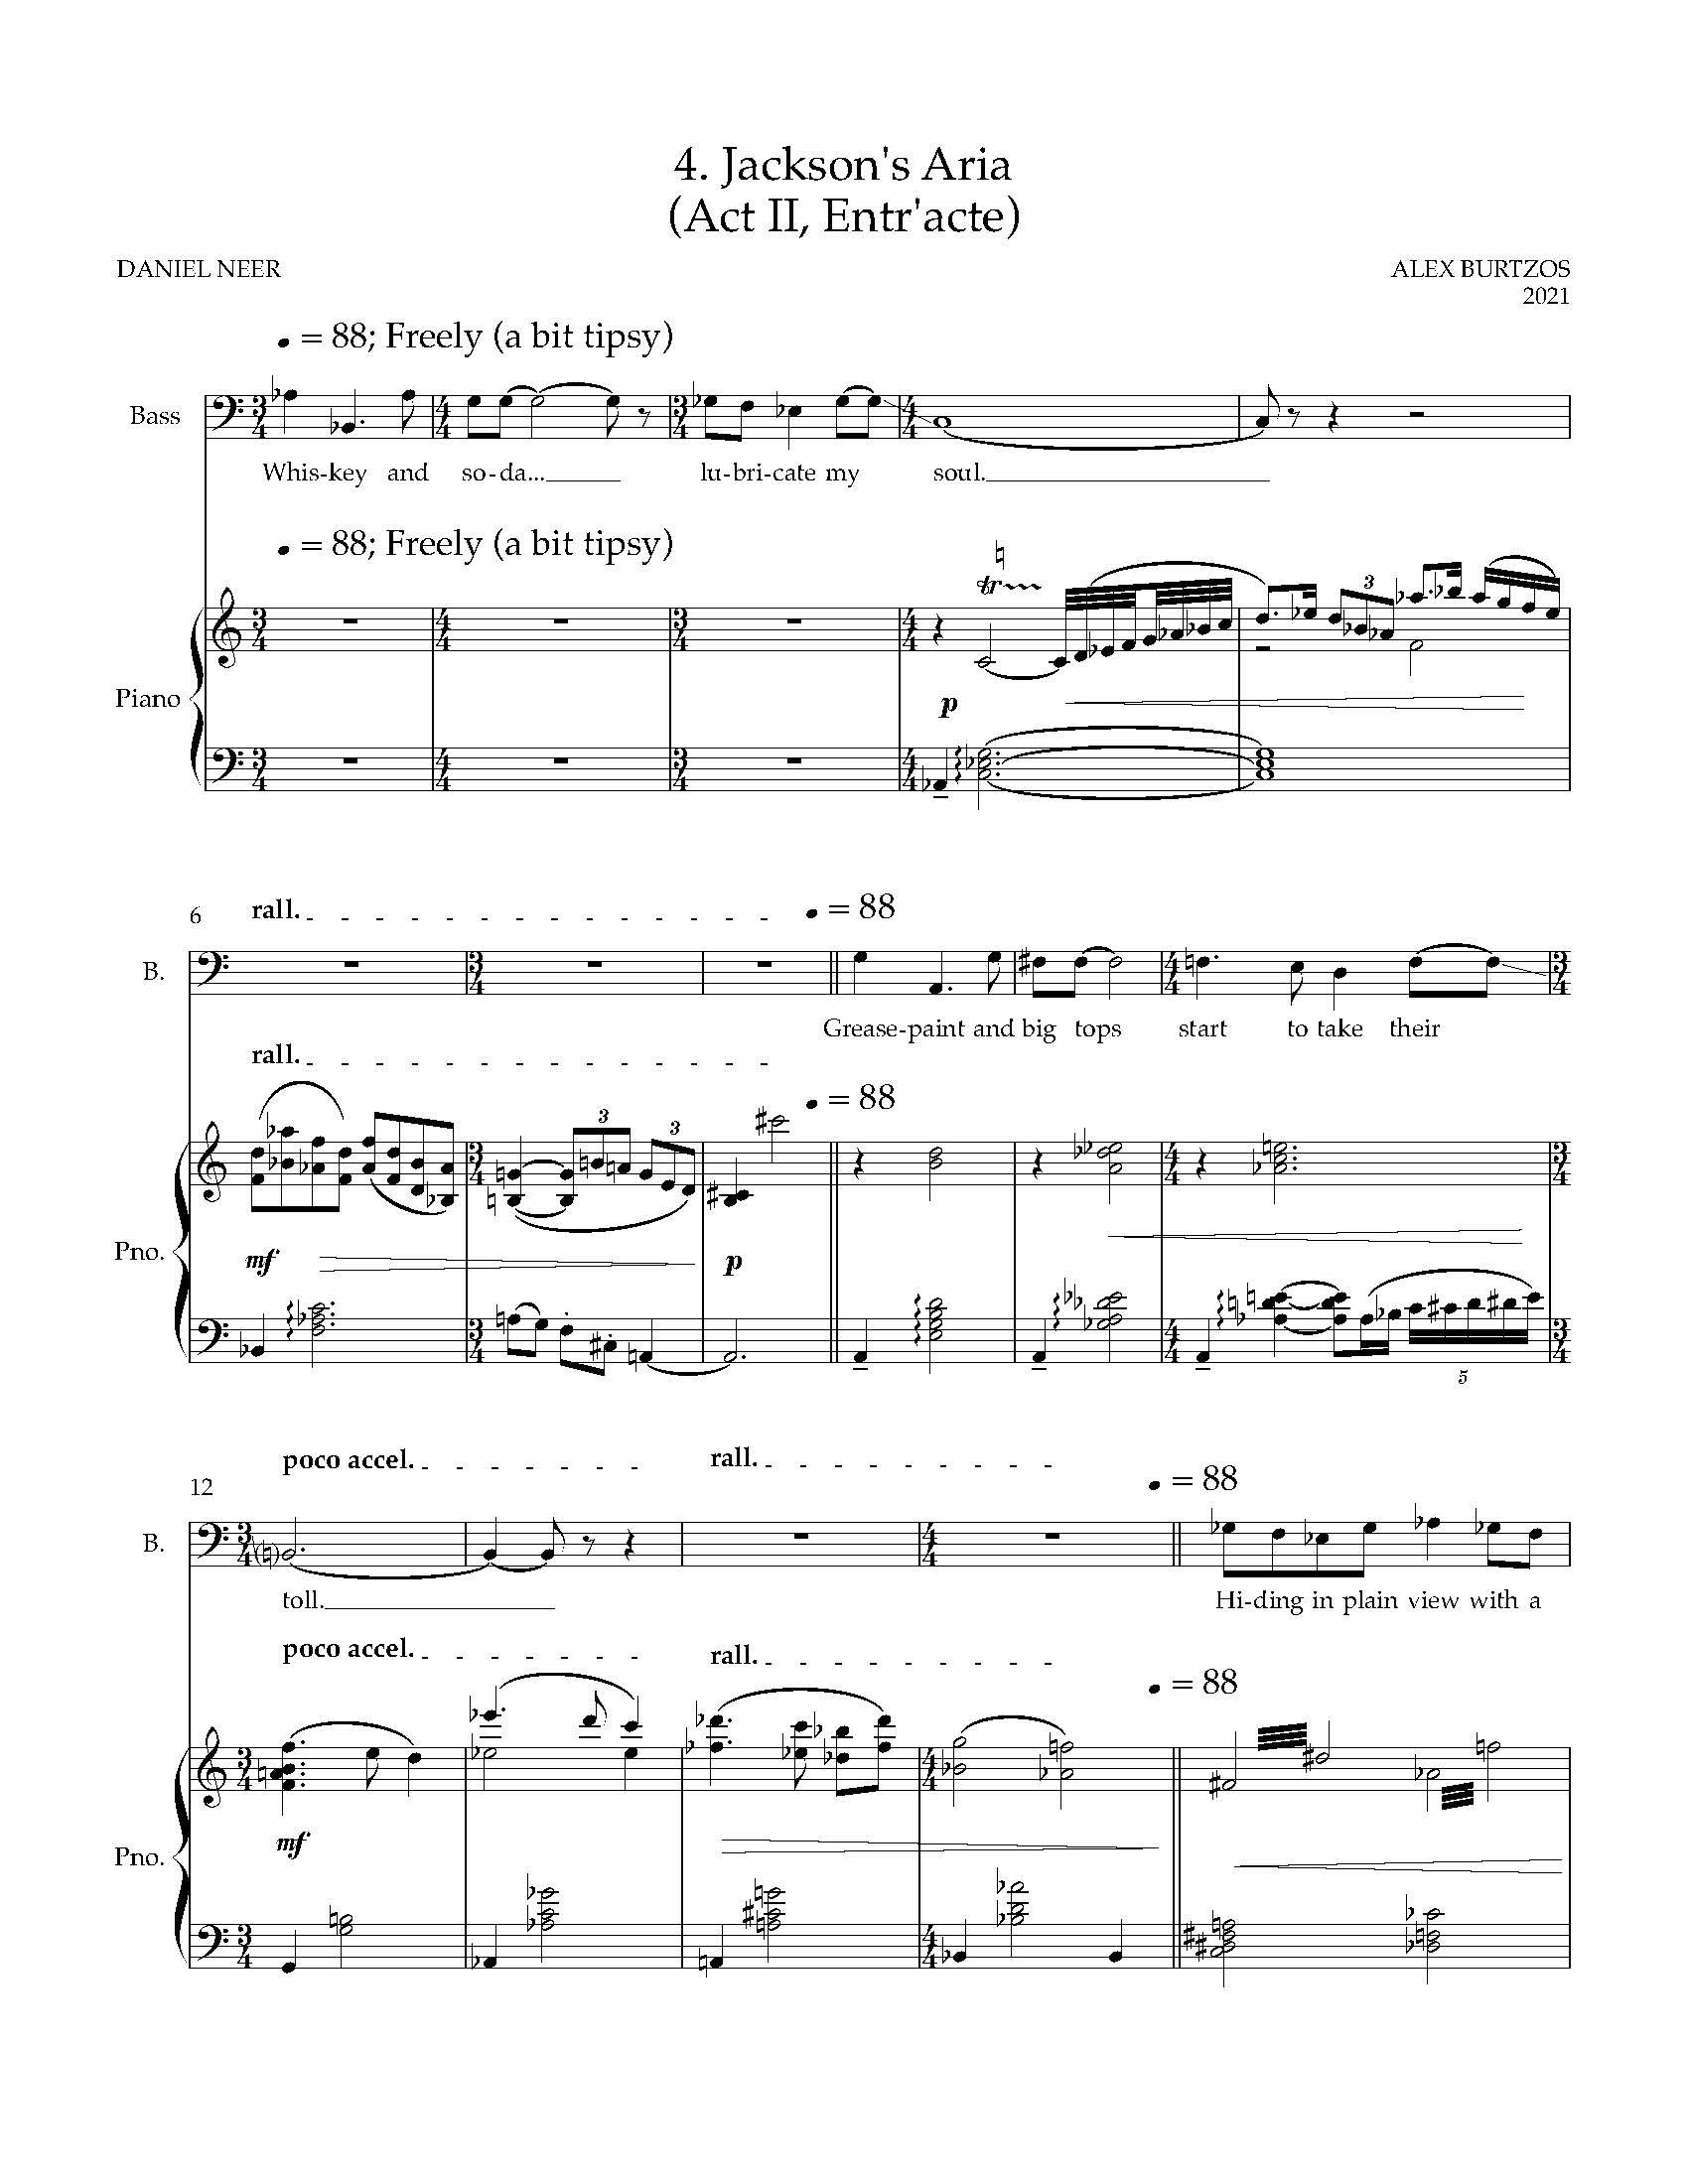 Five Arias from HWGS - Complete Score (1)_Page_21.jpg